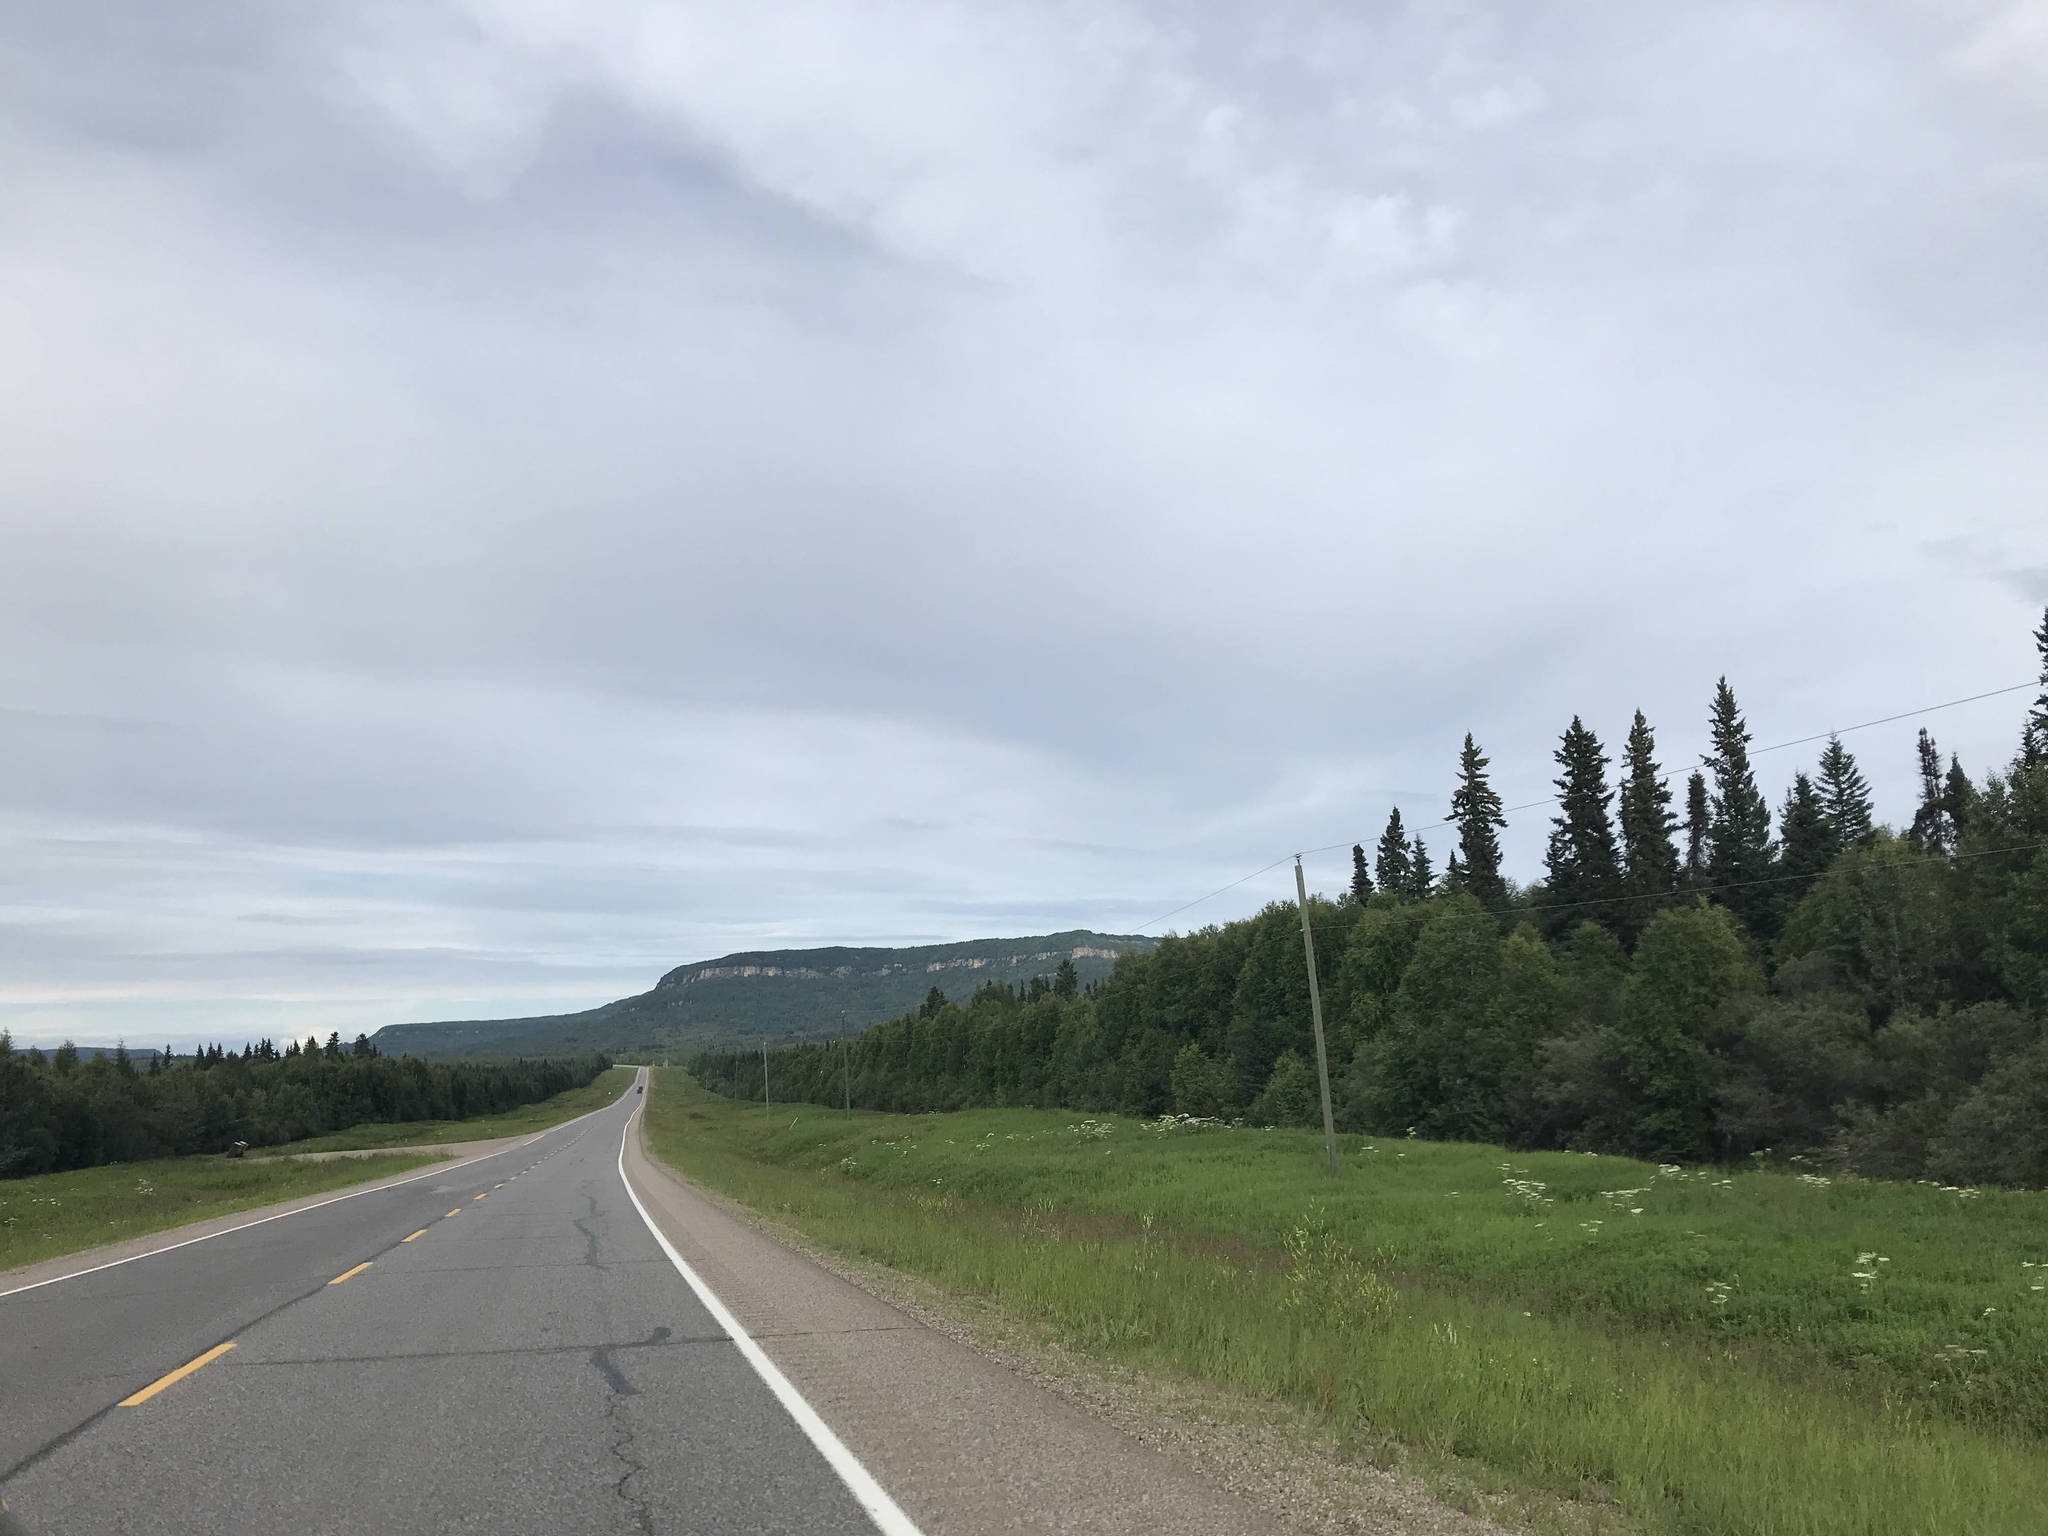 The Alaska Highway on July 15, 2020. (Photo by Camille Botello/Peninsula Clarion)